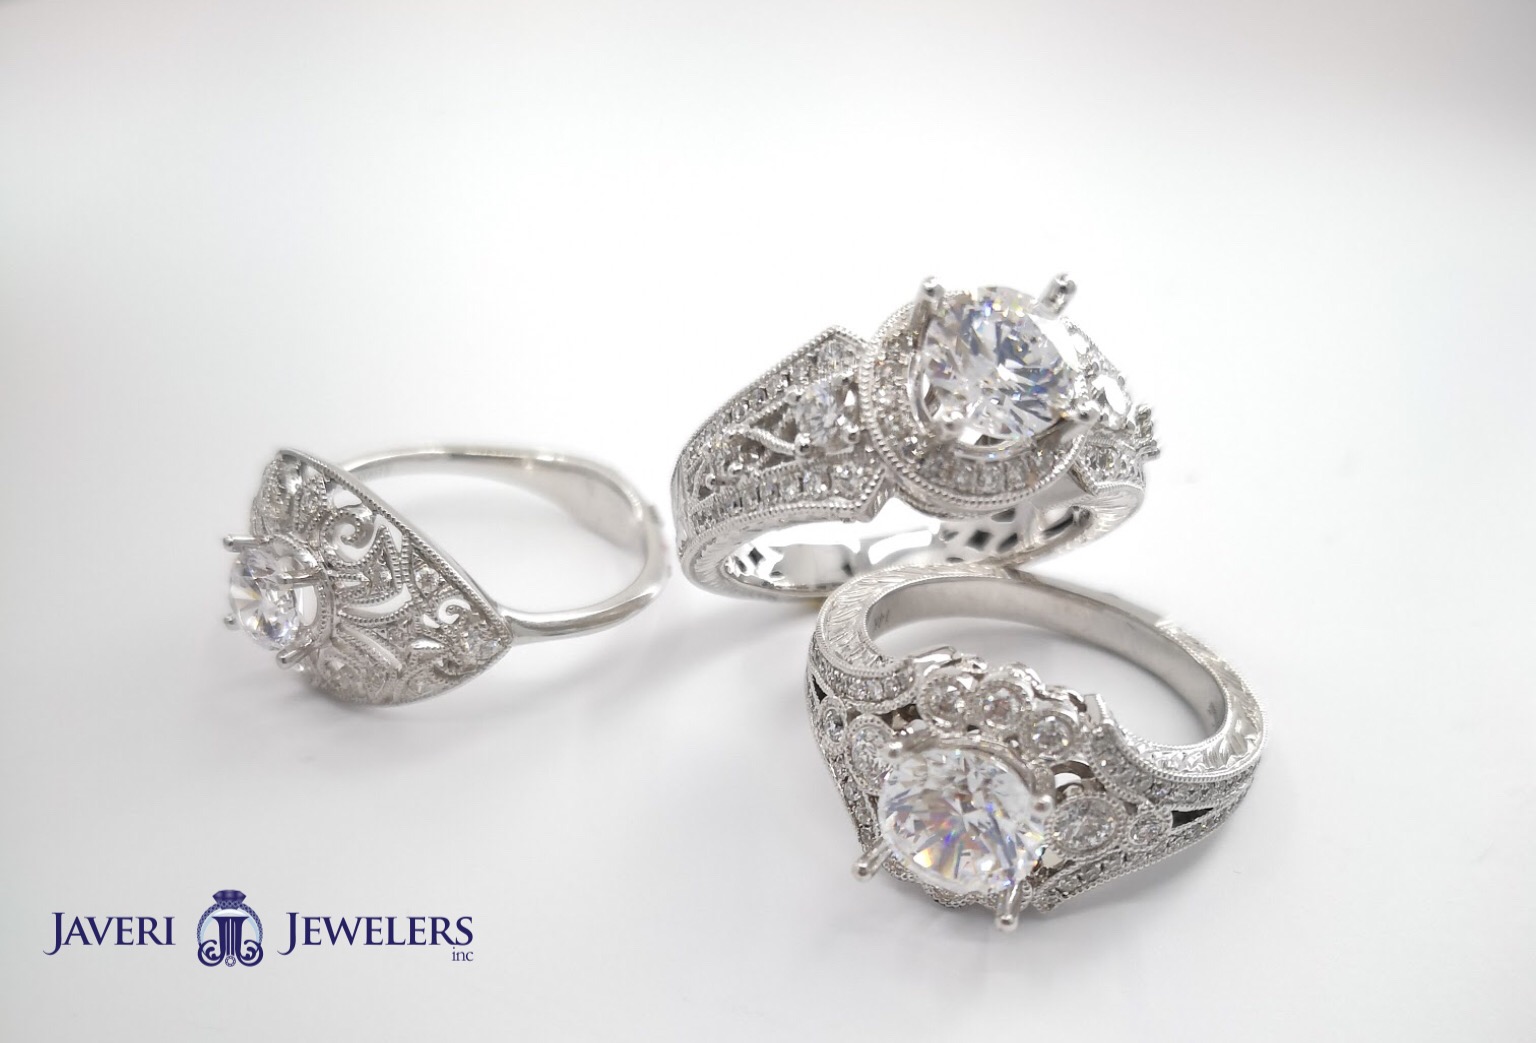 Vintage style engagement rings  Shop vintage and Art Deco inspired engagement rings  Javeri Jewelers Inc Frisco, TX